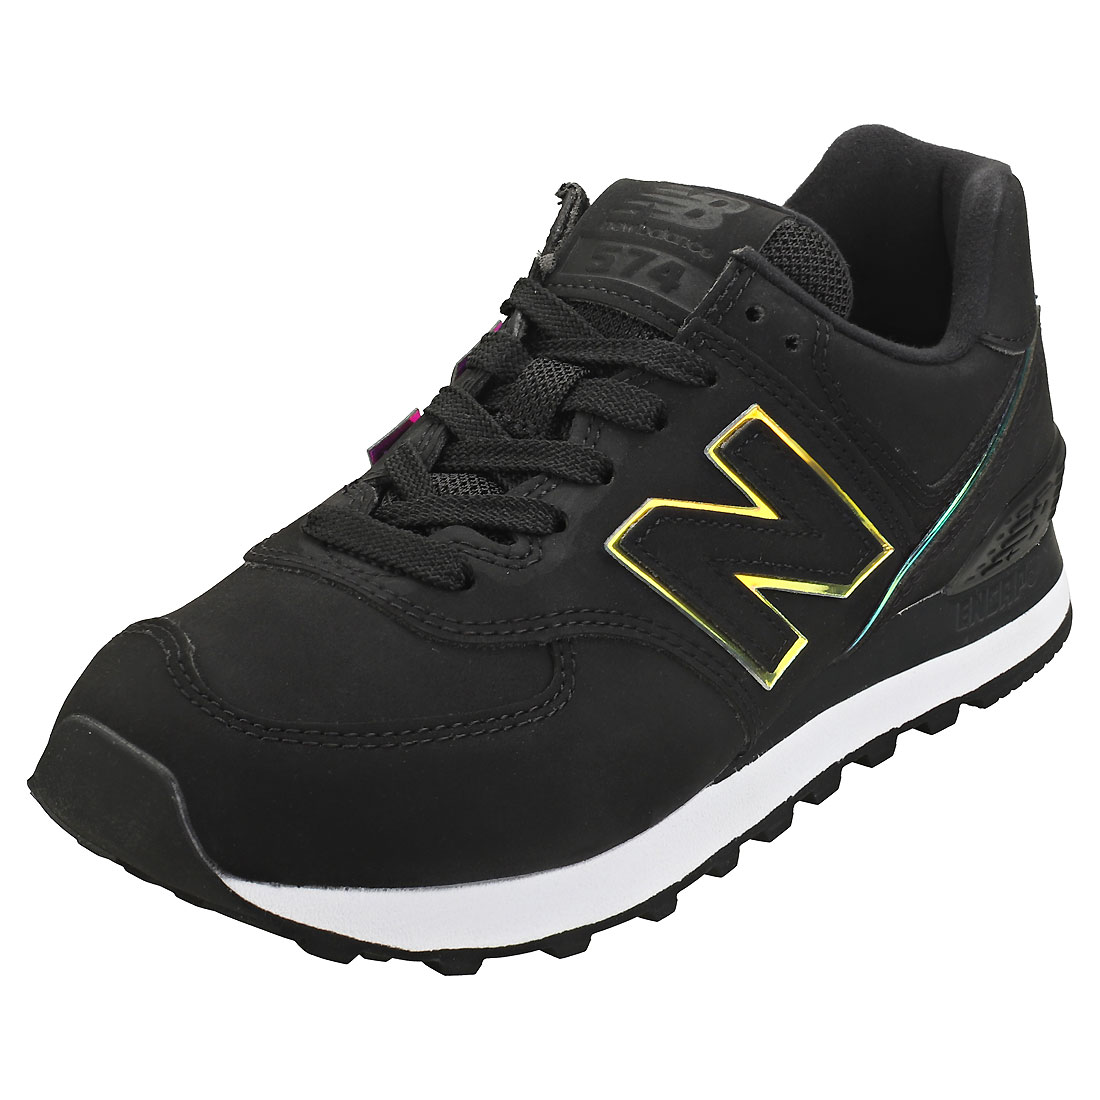 new balance black suede 574 trainers